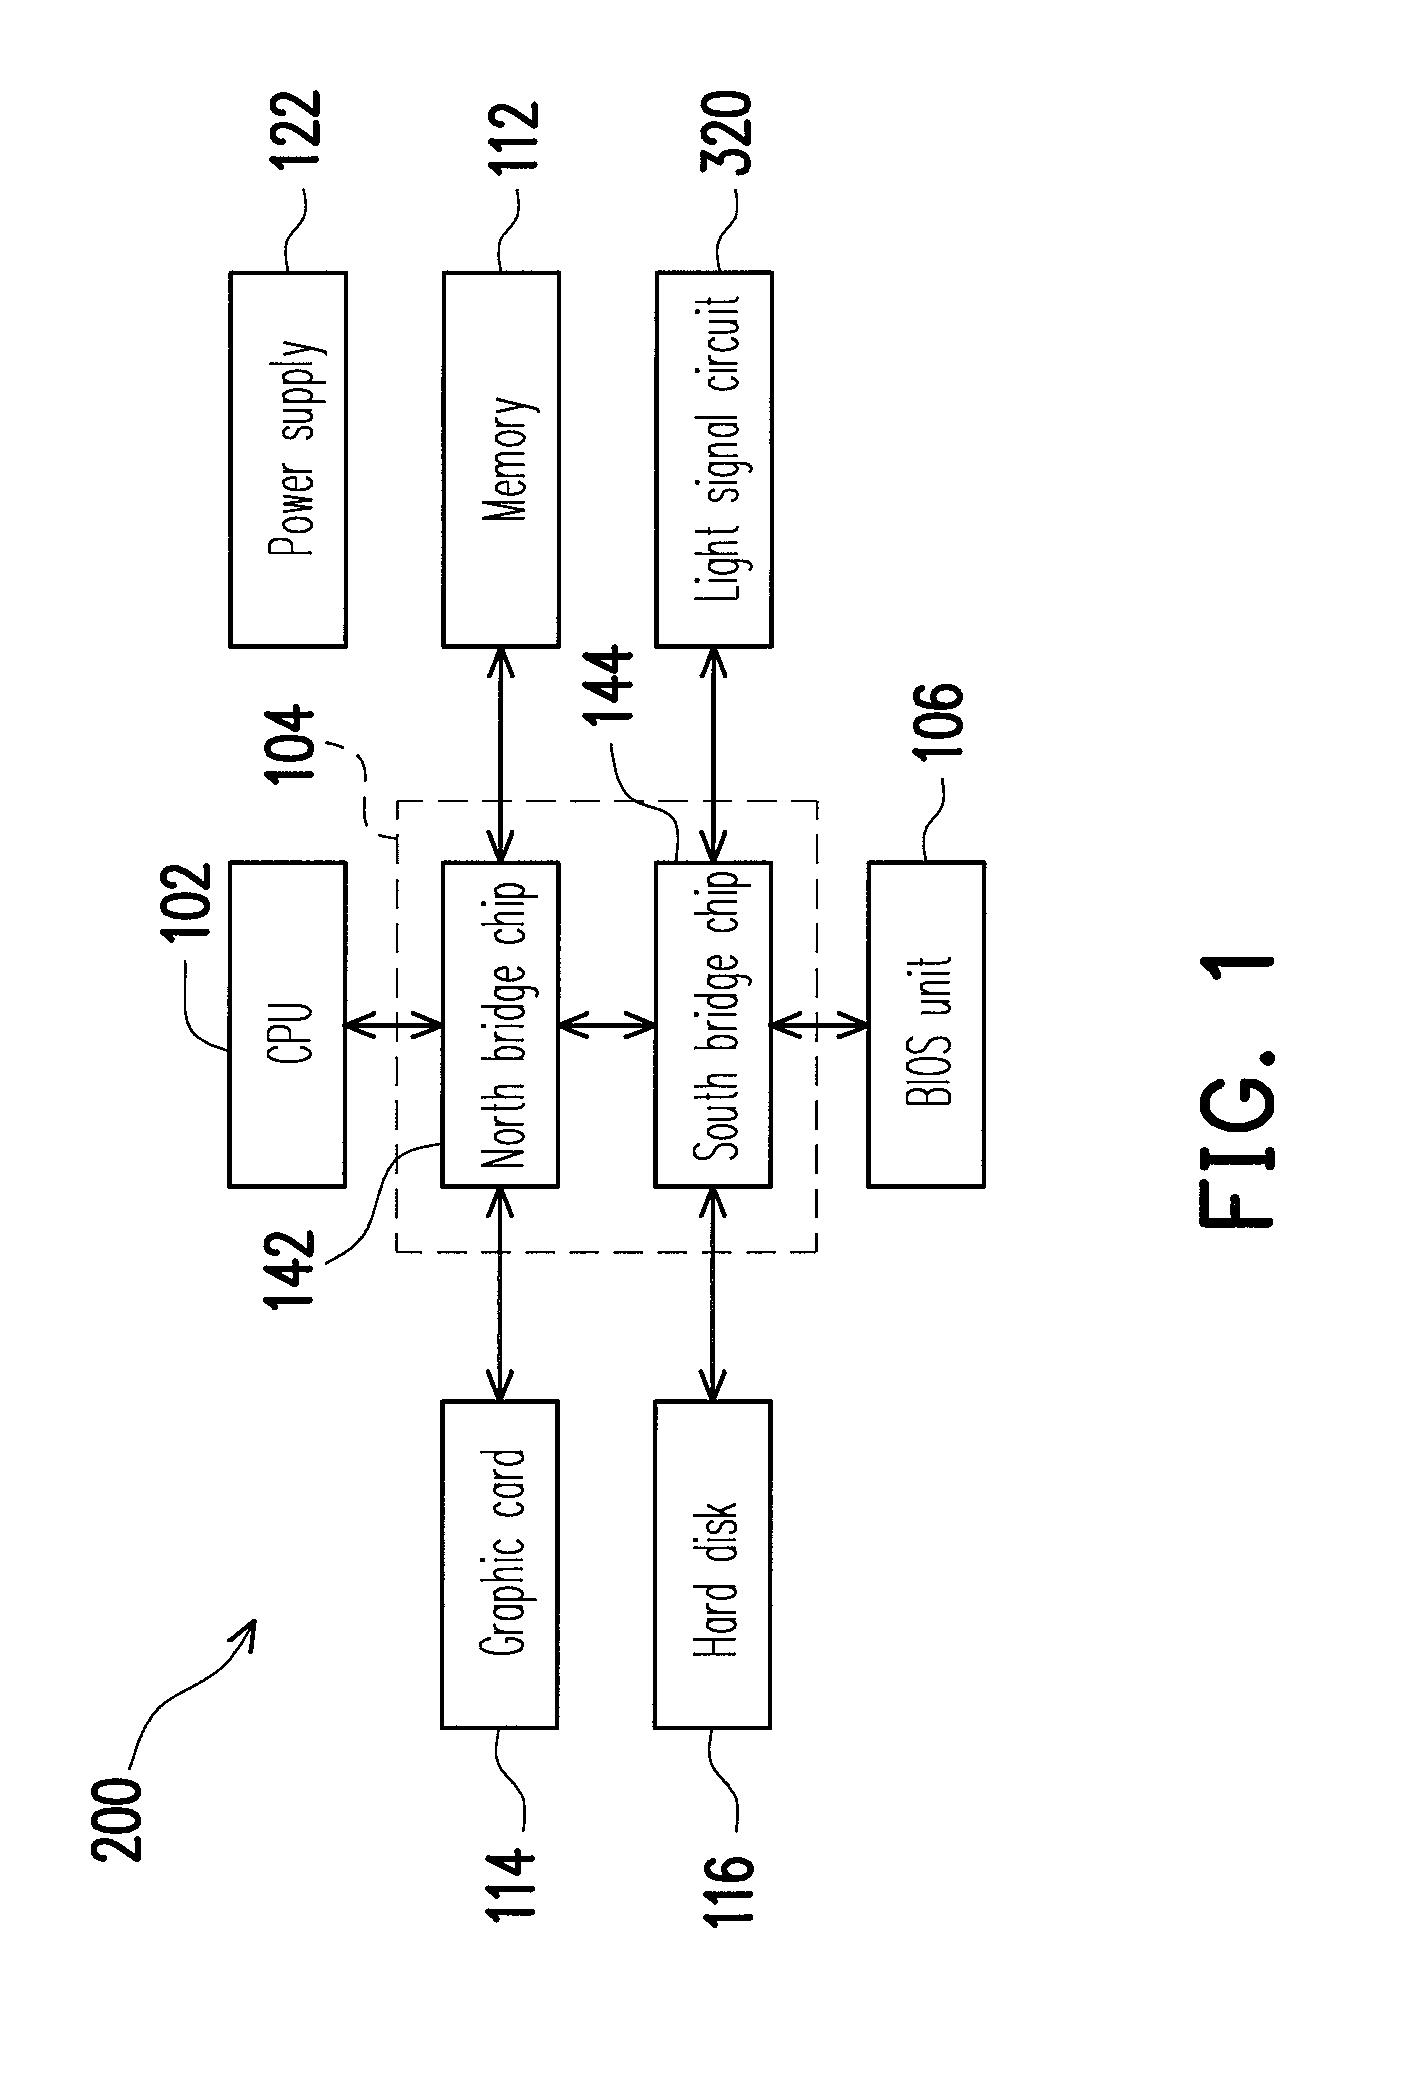 Computer system, method and system for controlling light